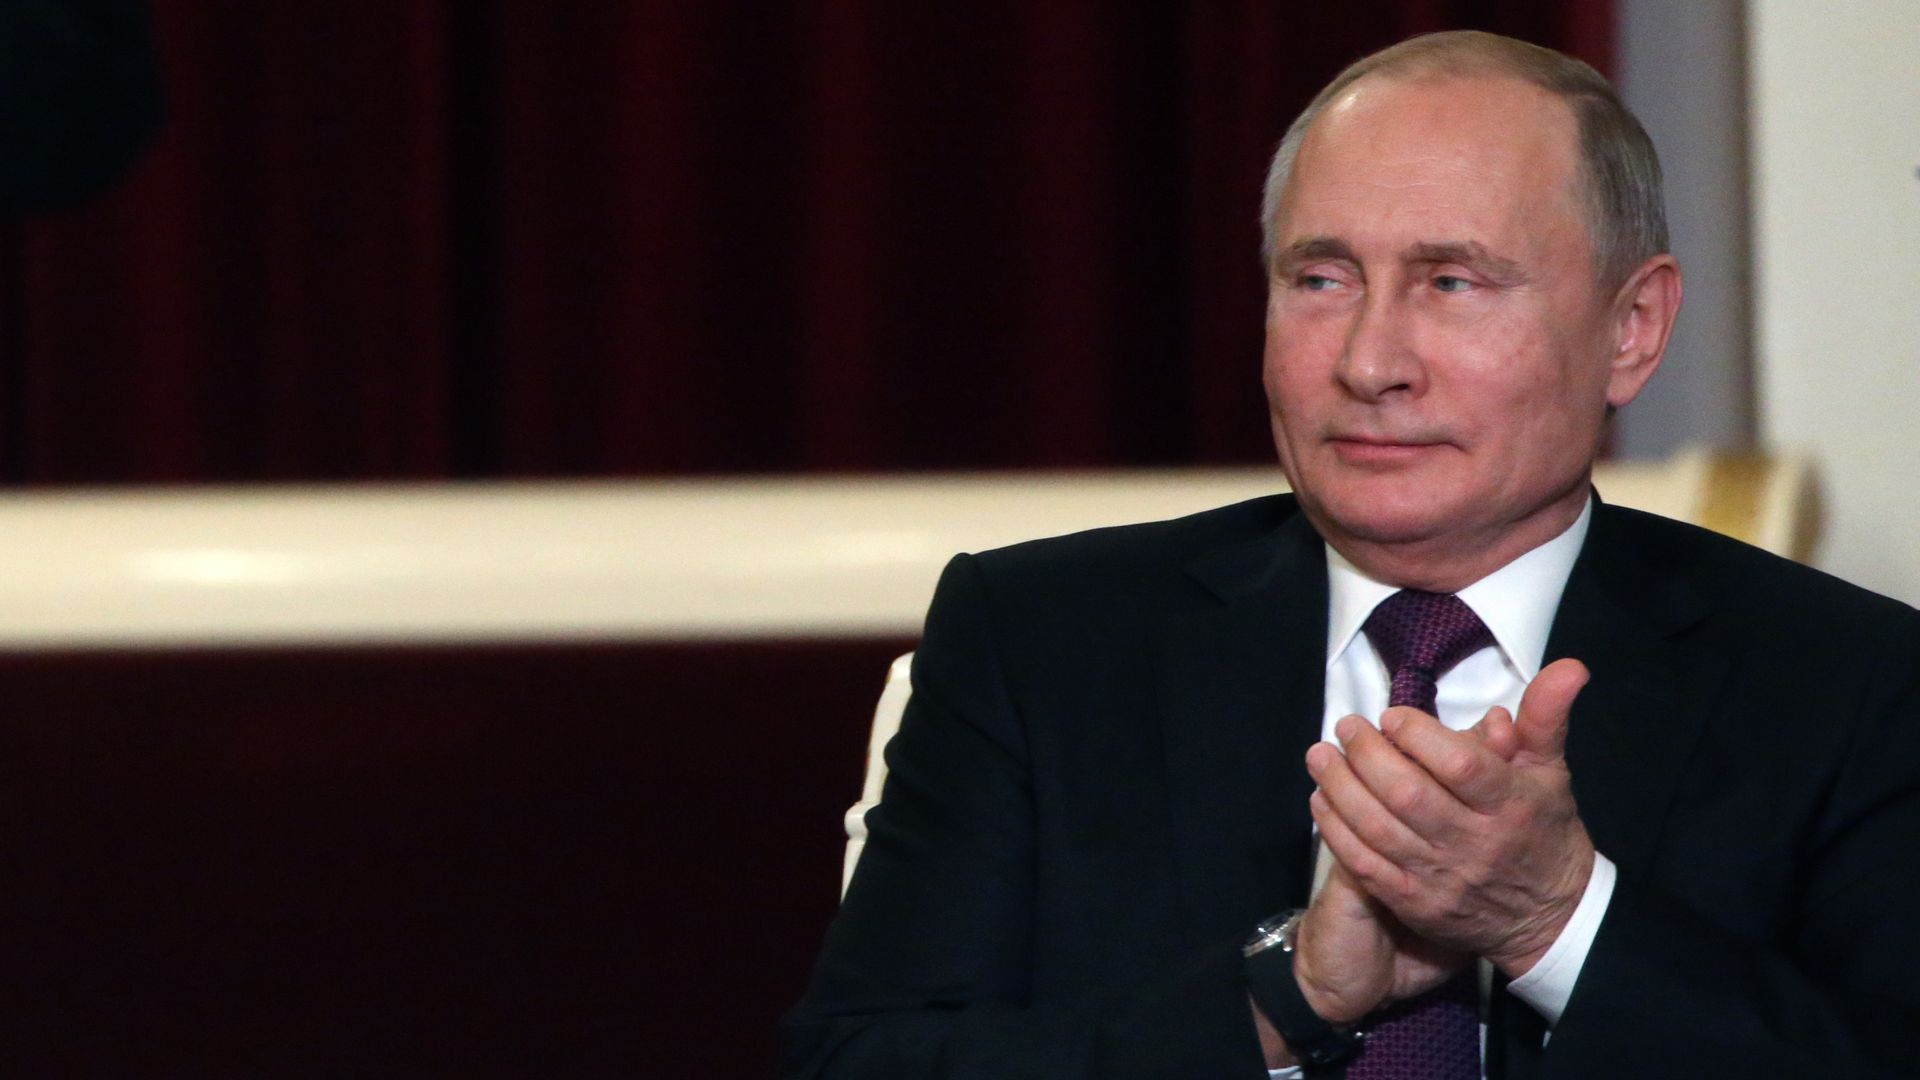 Vladimir Putin glances to his right while clapping his hands together